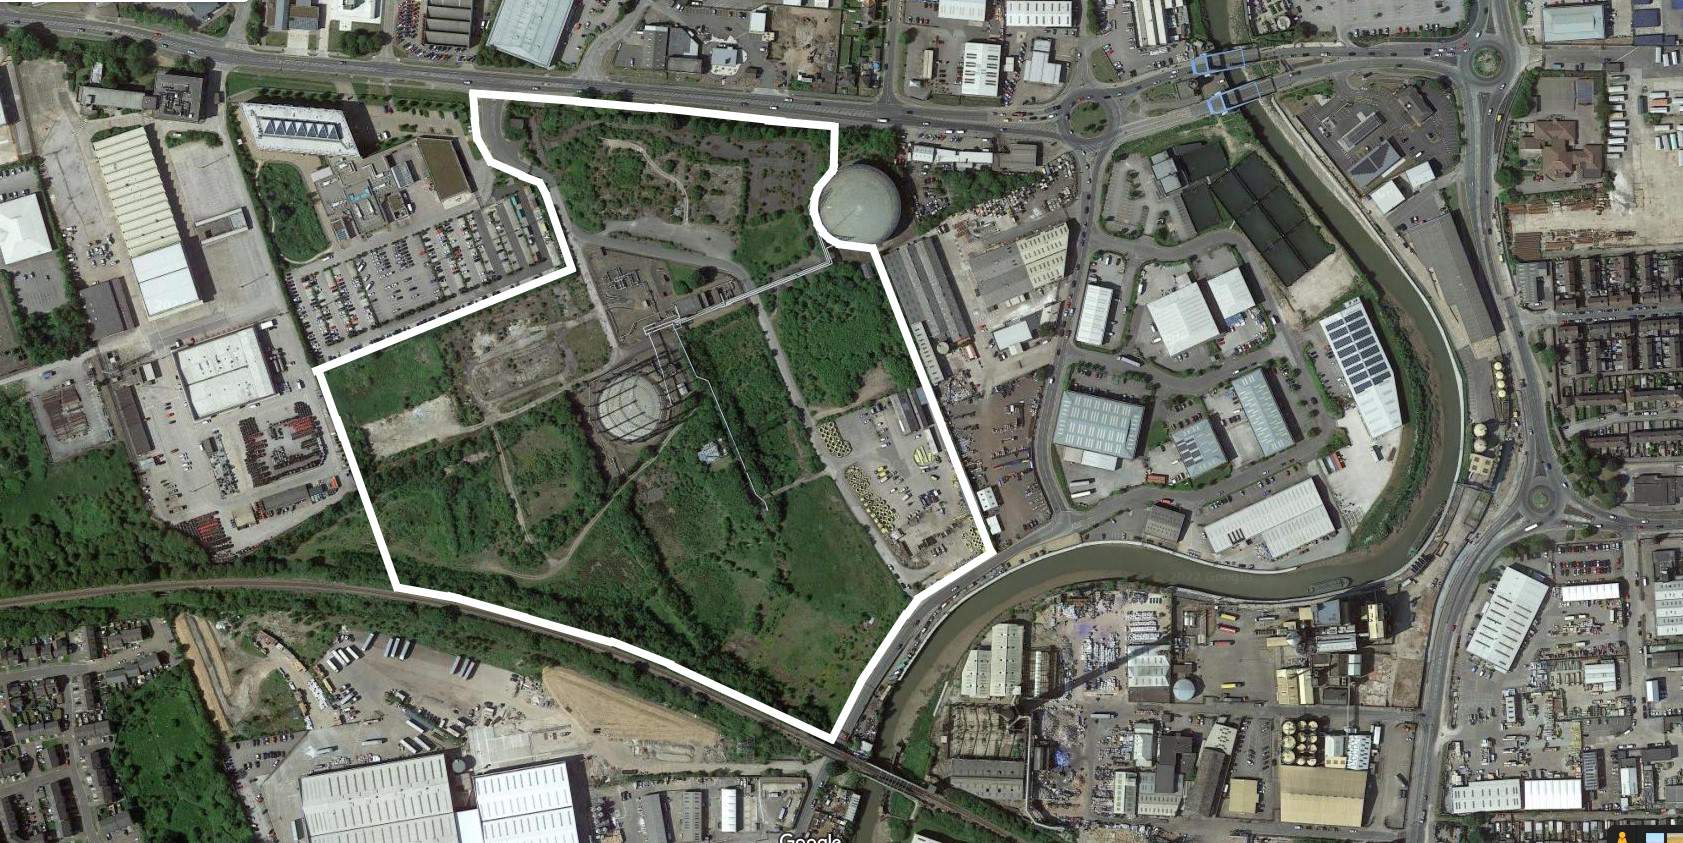 Acquisition of 33 acres of industrial land off Clough Road in Hull